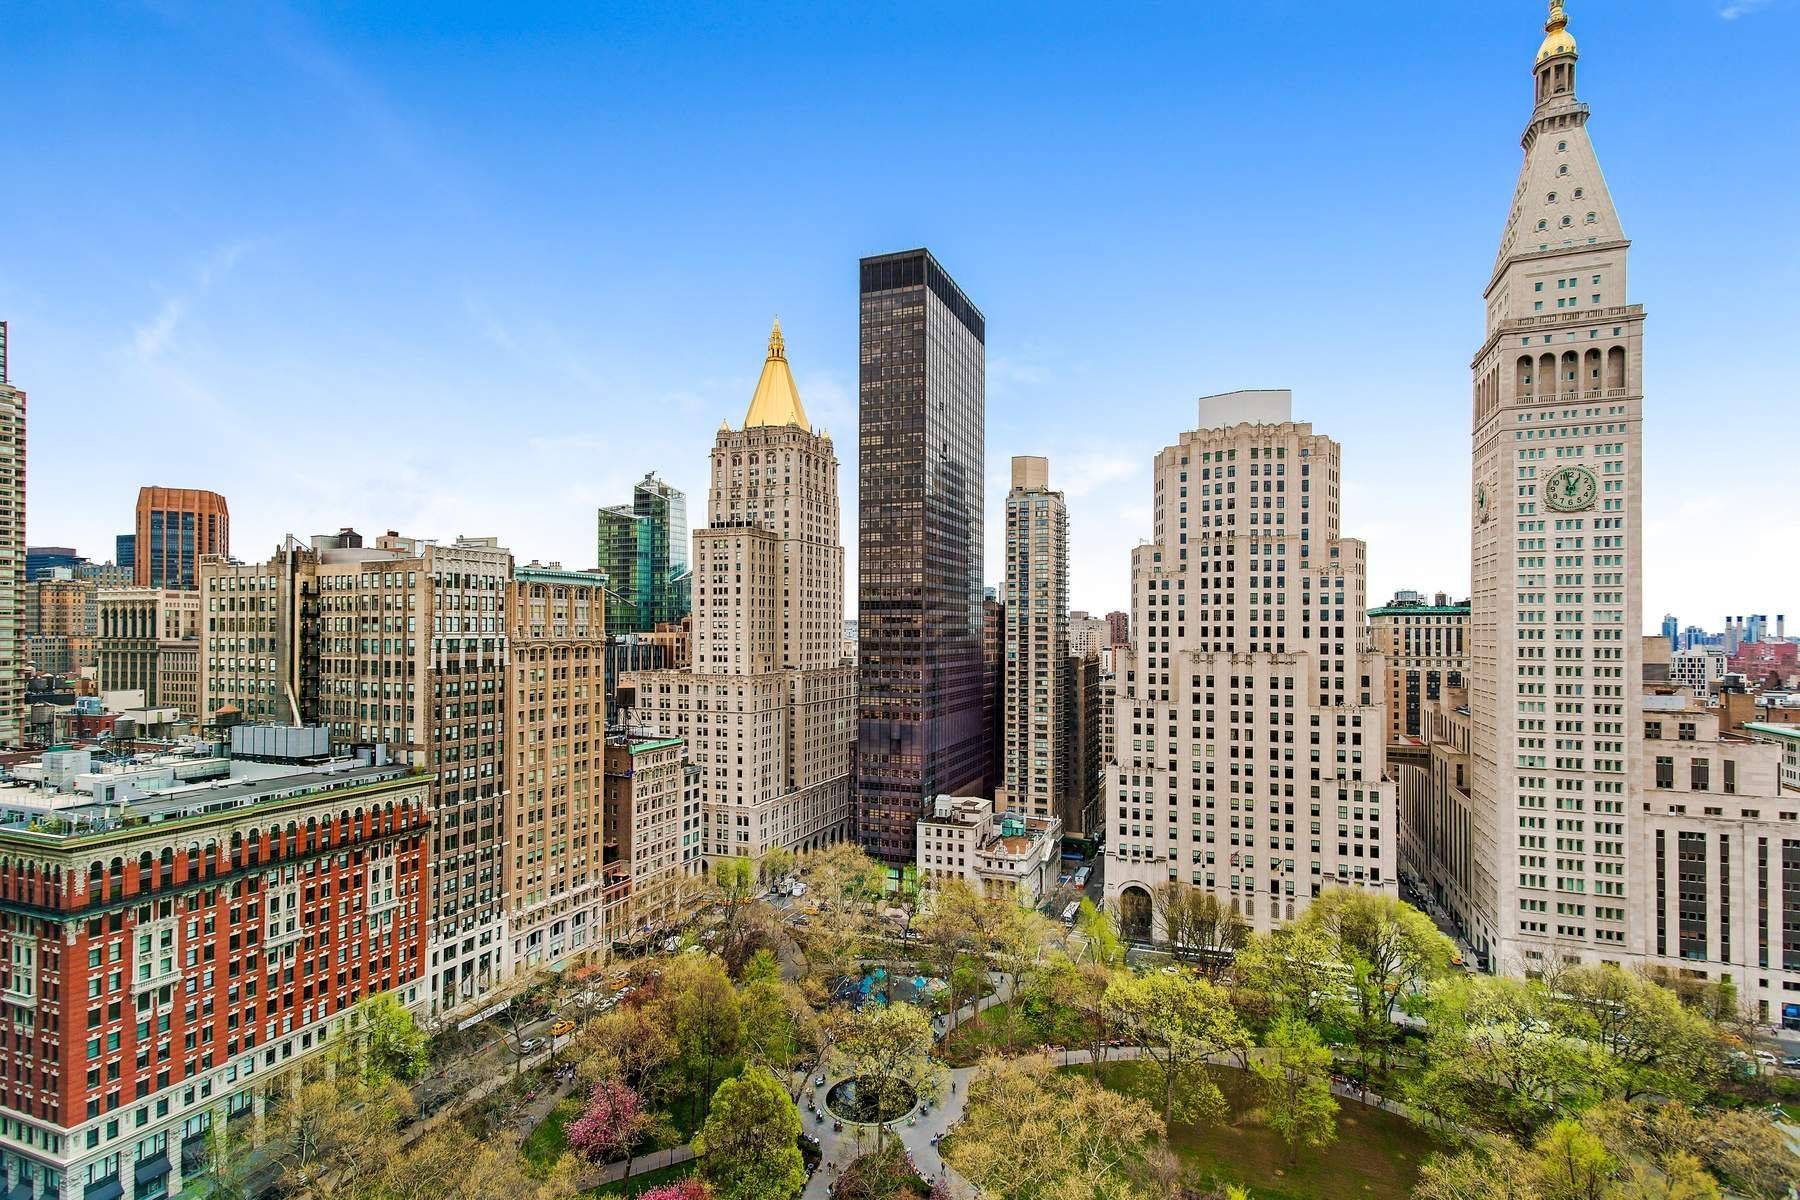 This exceptional home is nestled high in the exclusive tower section of recently converted 10 Madison Square West prewar building the creation of Alan Wanzenberg and Steve Witkoff visionaries.